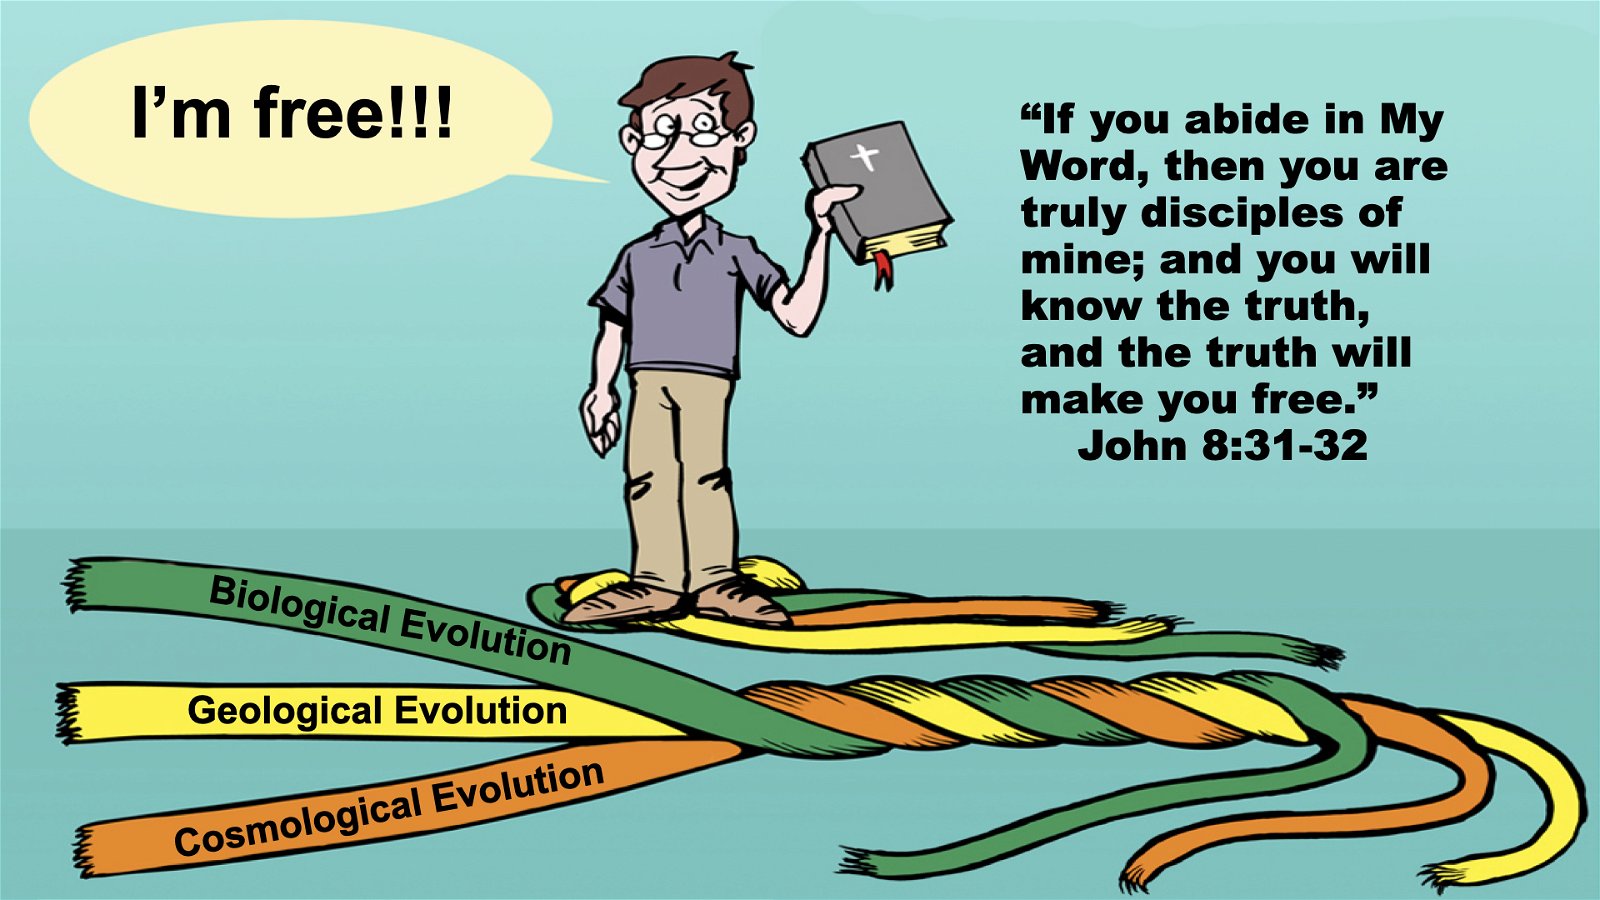 Young-earth creationist